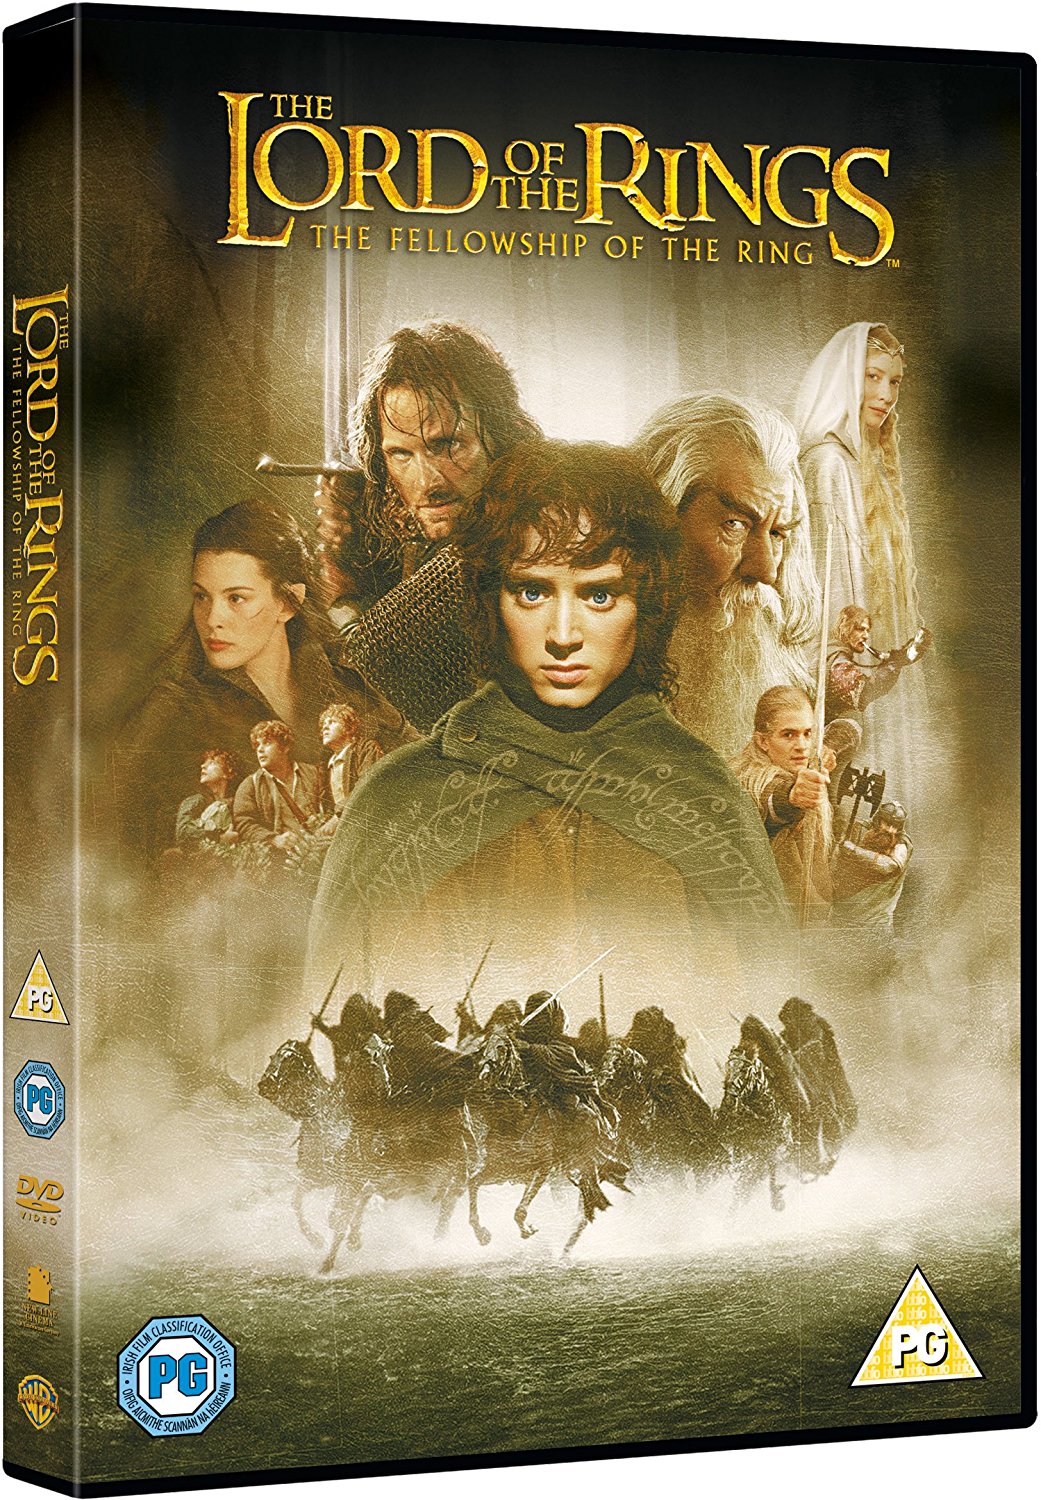 The Lord Of The Rings - The Fellowship Of The Ring (DVD)